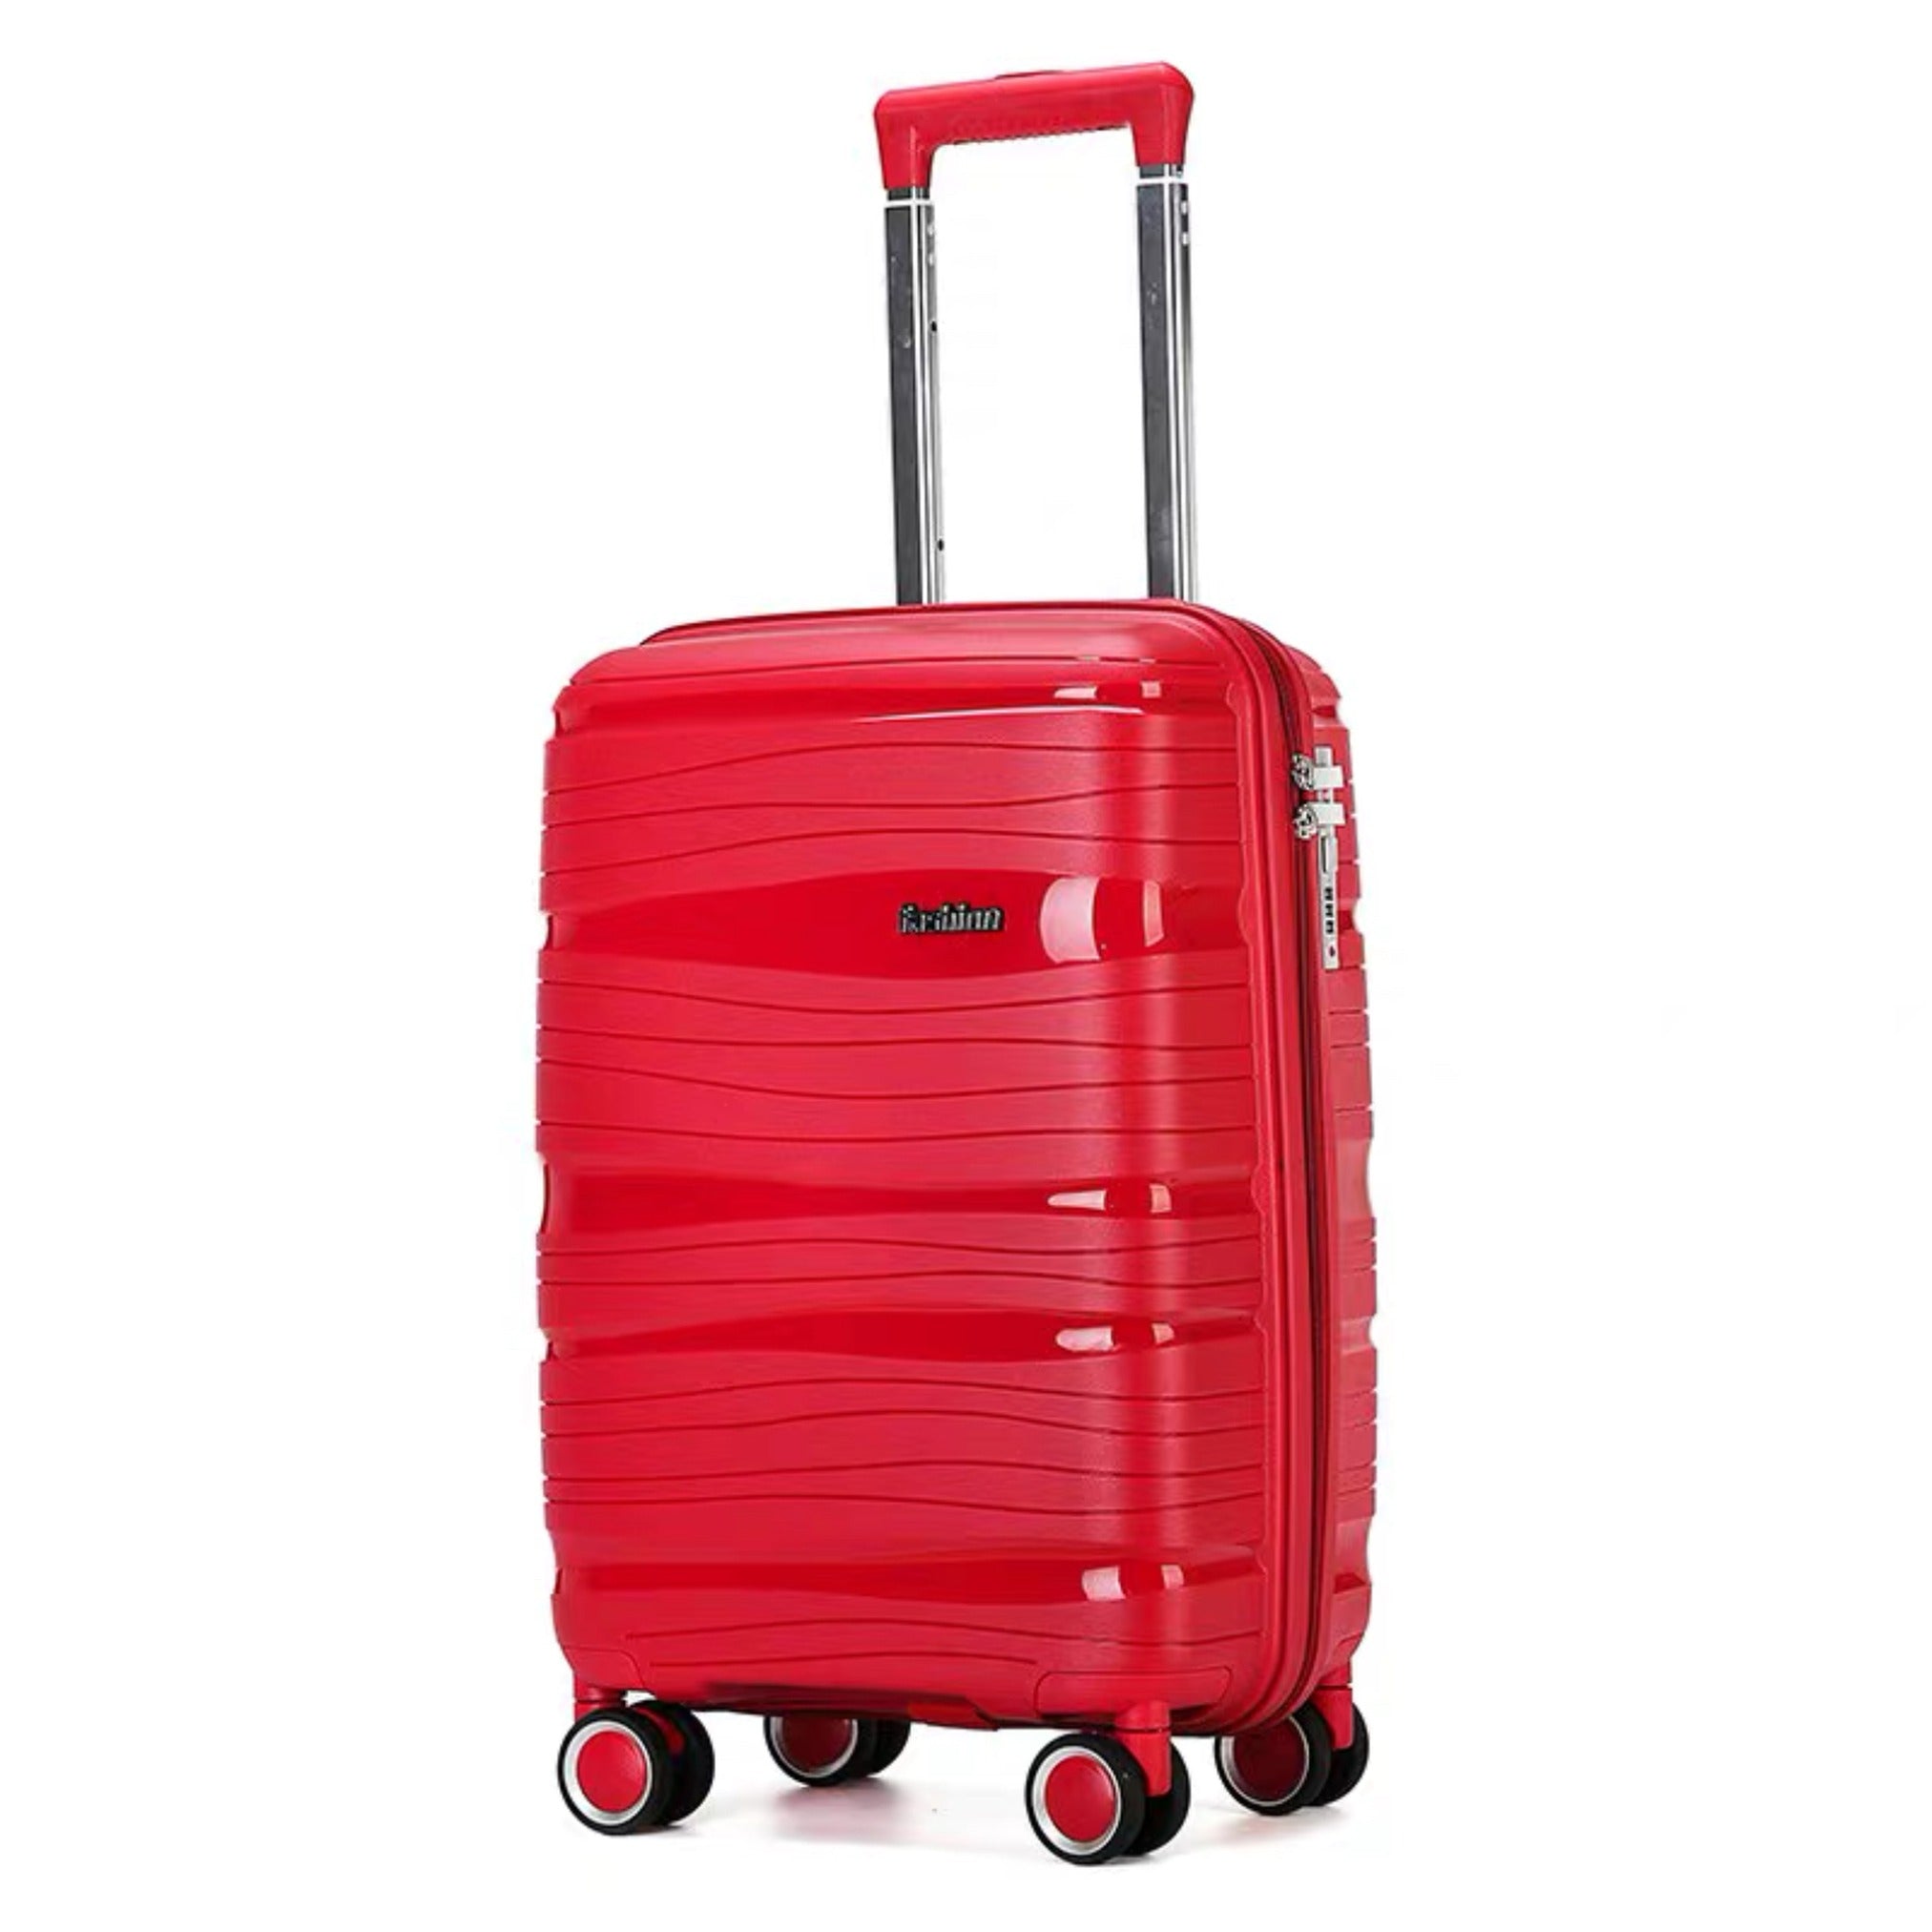 20" Red Colour Royal PP Lightweight Carry On Luggage Bag with Double Spinner Wheel